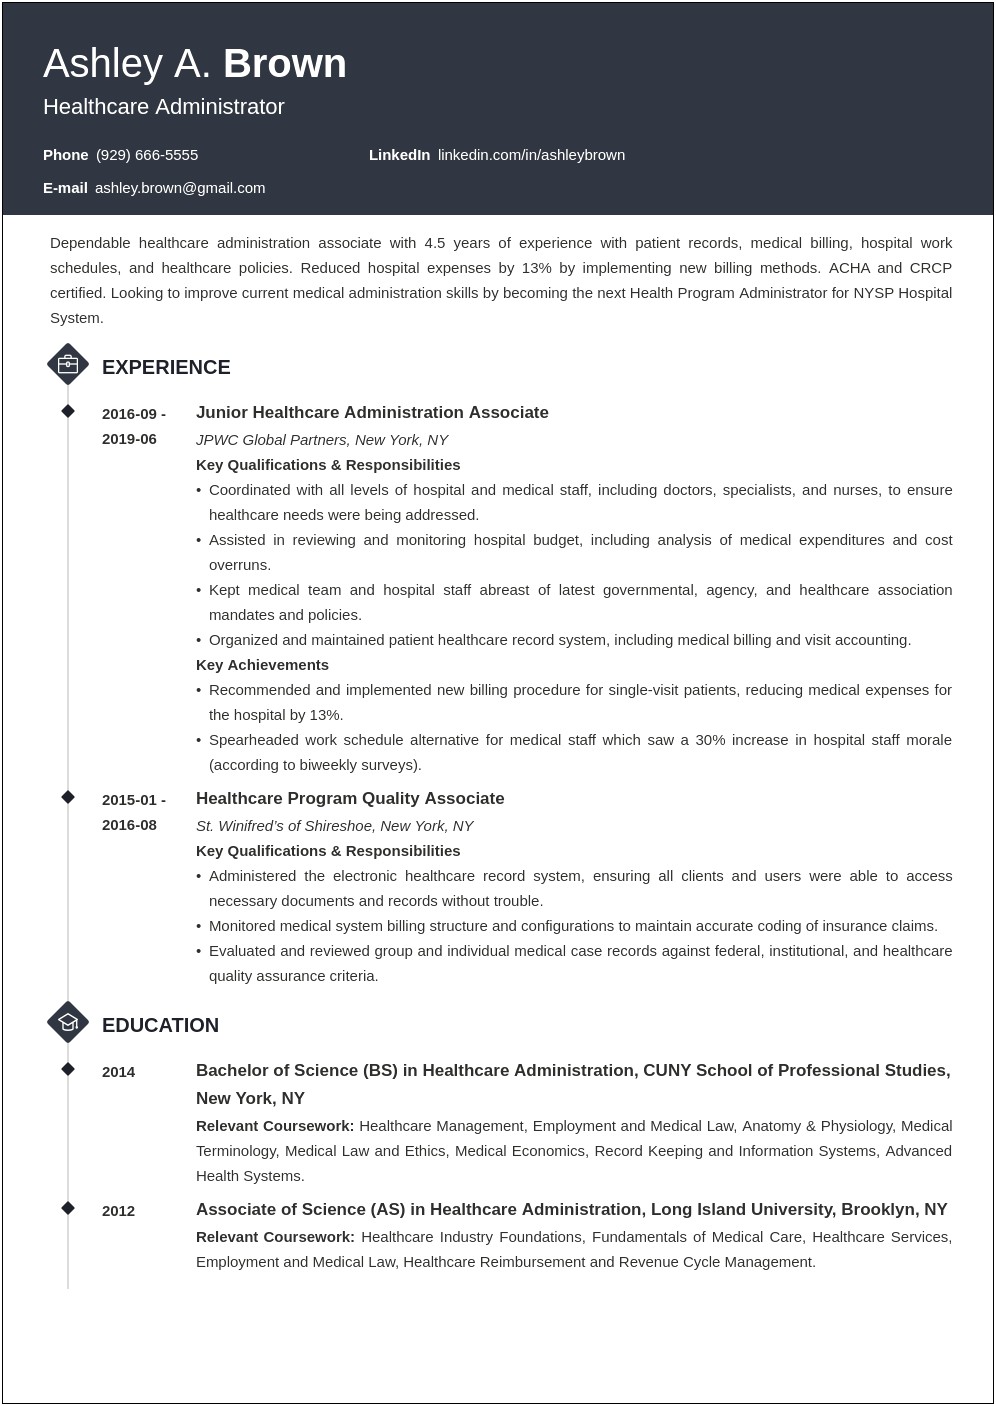 Resume New Skills Update Training Project Manager Healthcare